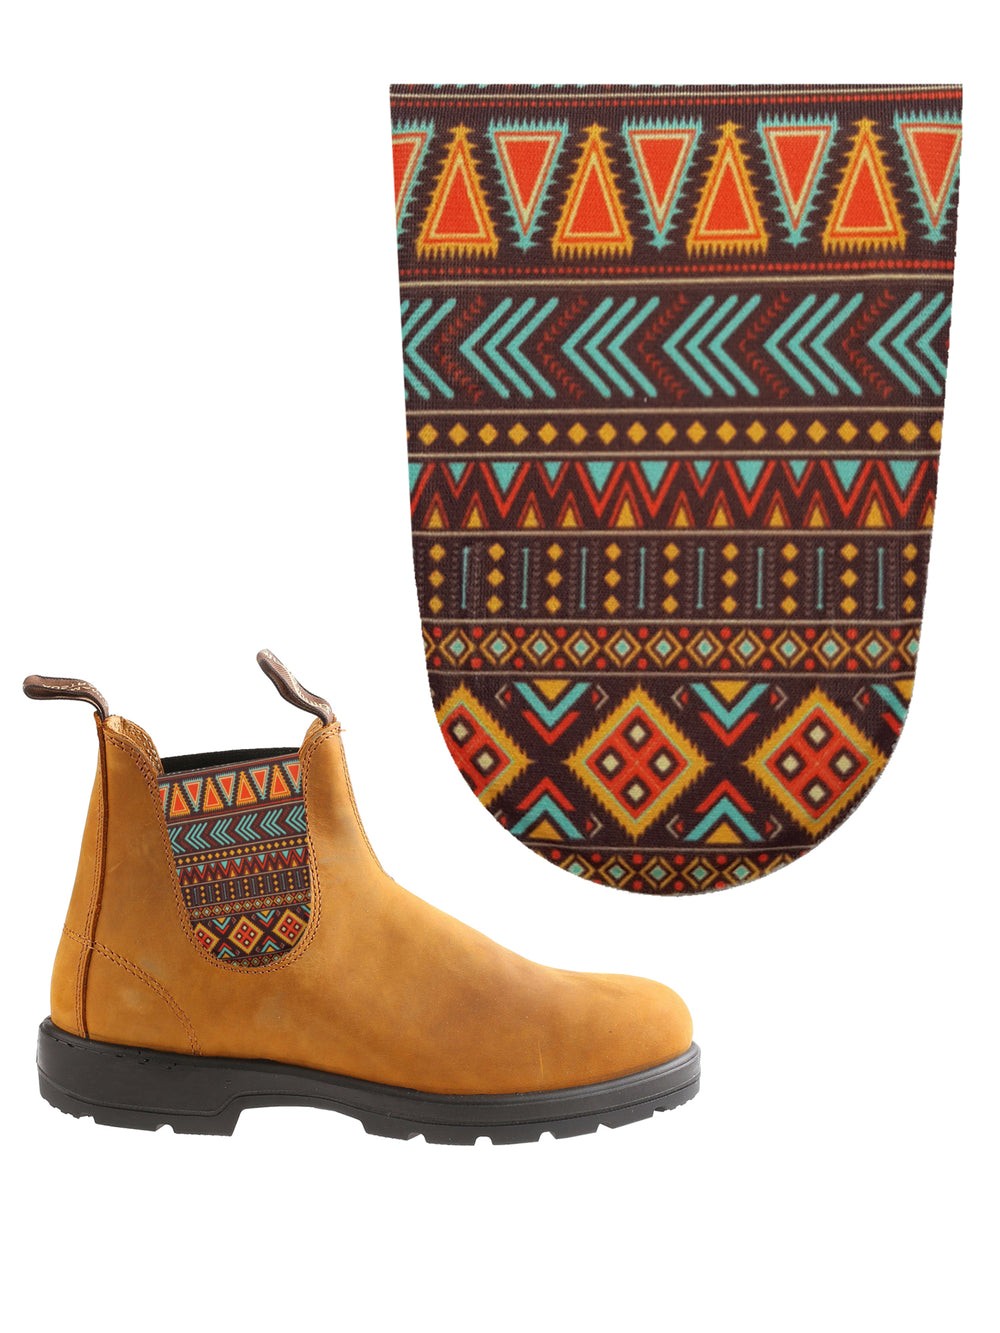 FUNSTONZE BOOT CLIP - TRIBAL - CLEARANCE